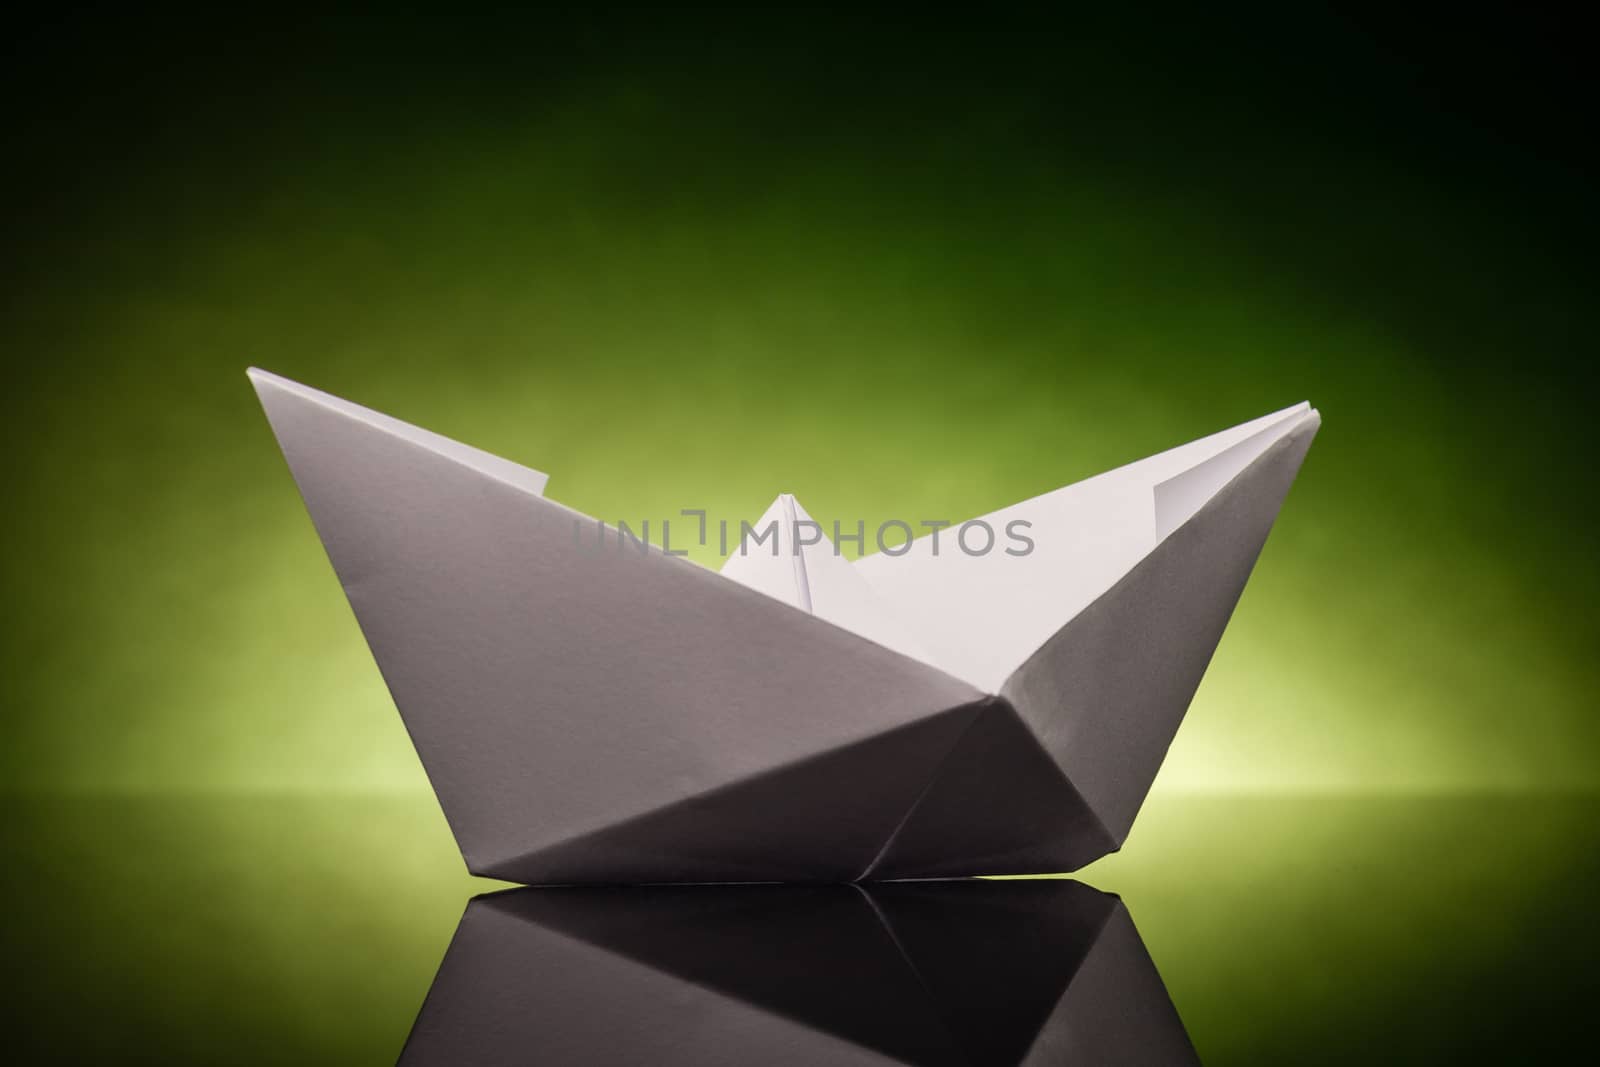 white origami paper boat with green back light